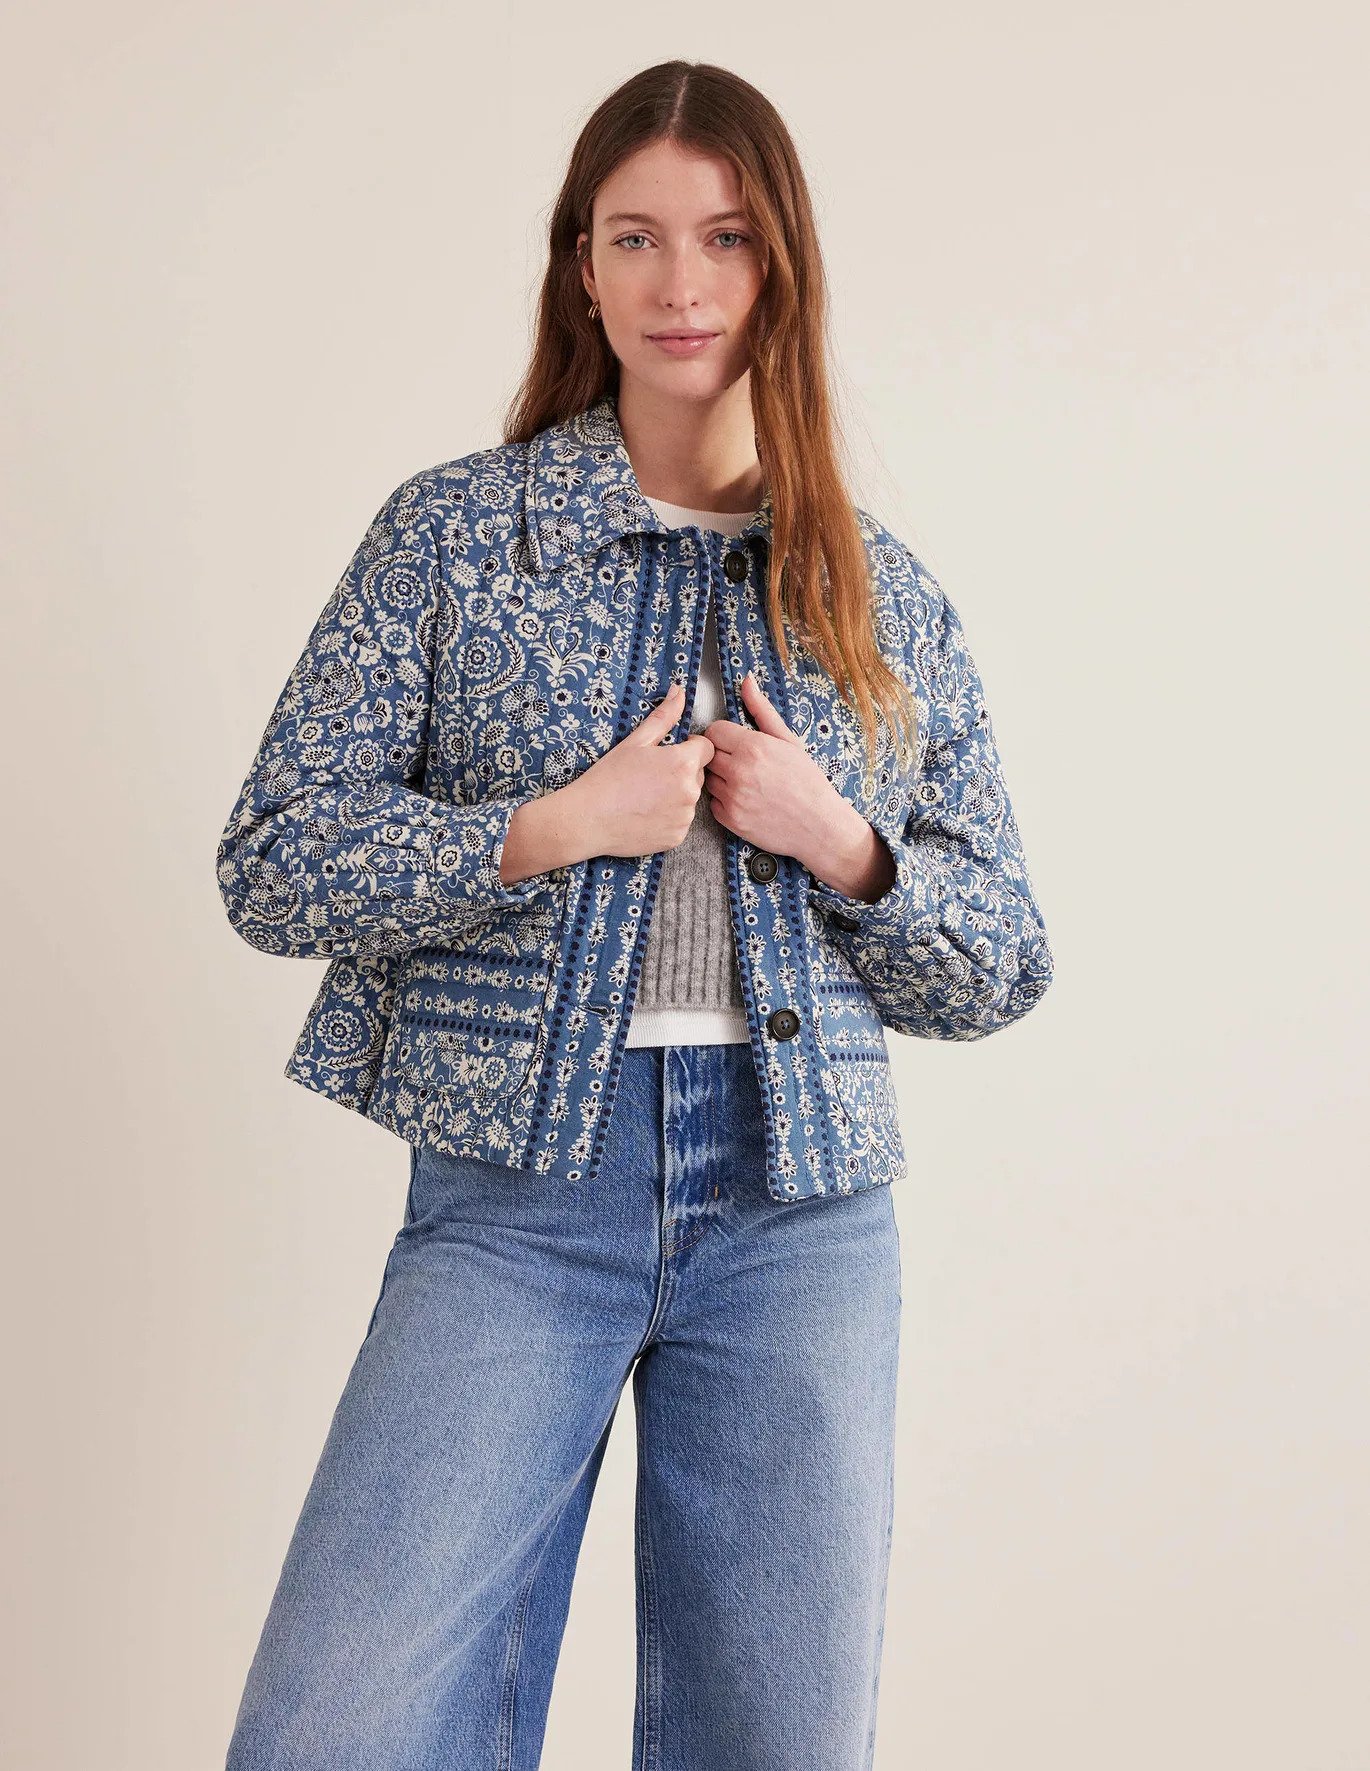 3 Jacket Trends That Are Dominating the High Street | Who What Wear UK